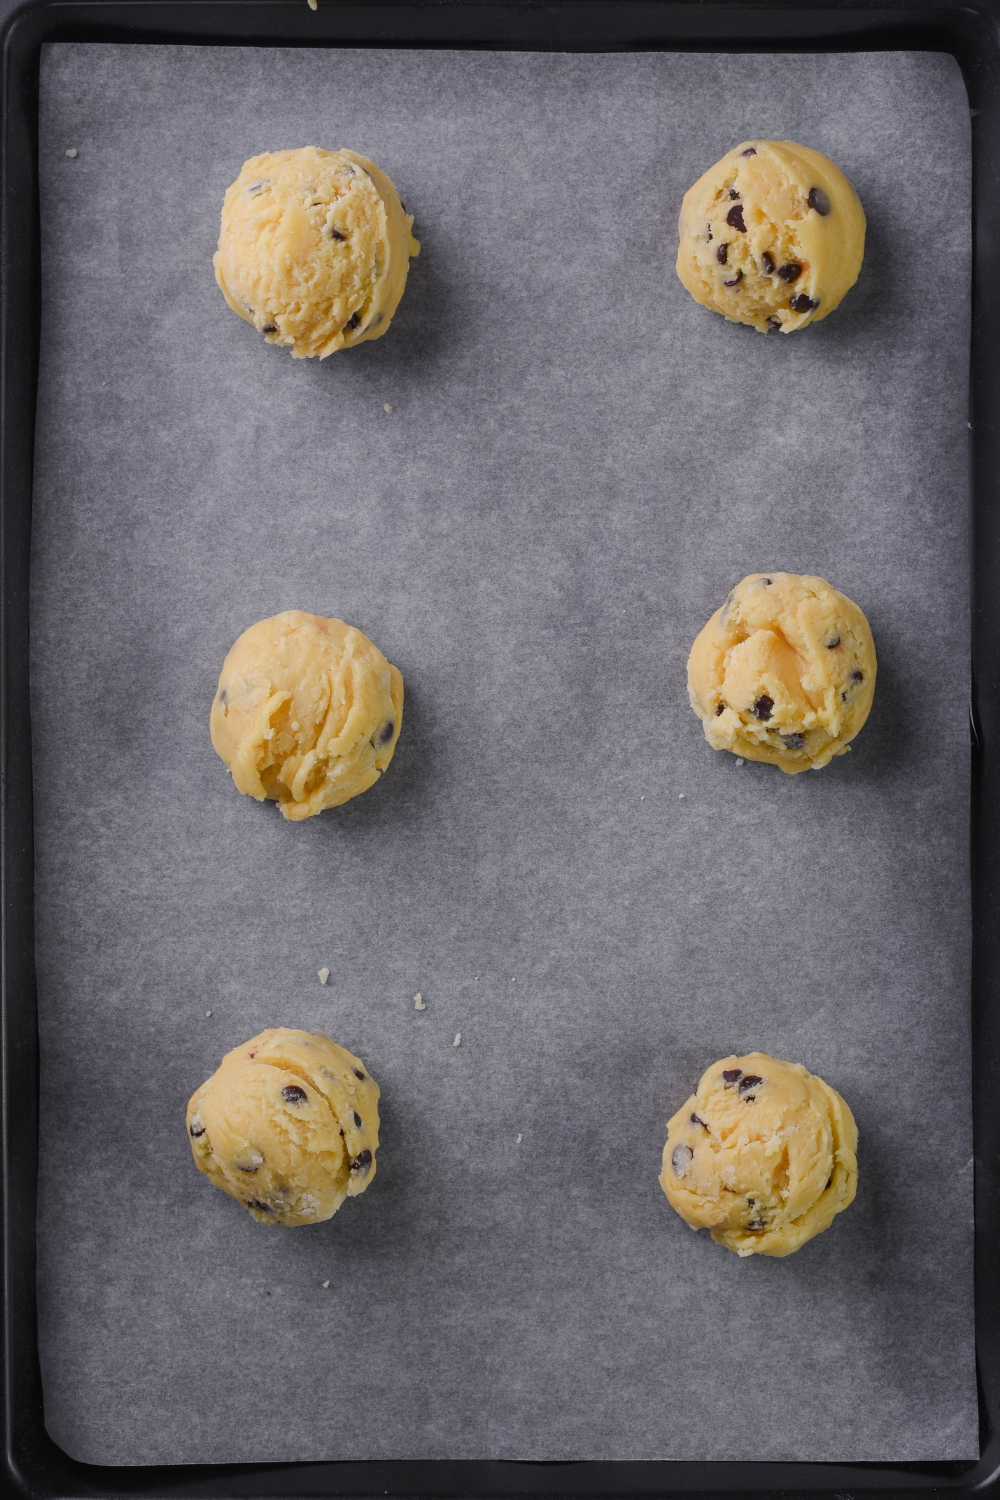 A baking sheet lined with parchment paper with 6 scoops of cookie dough on it.